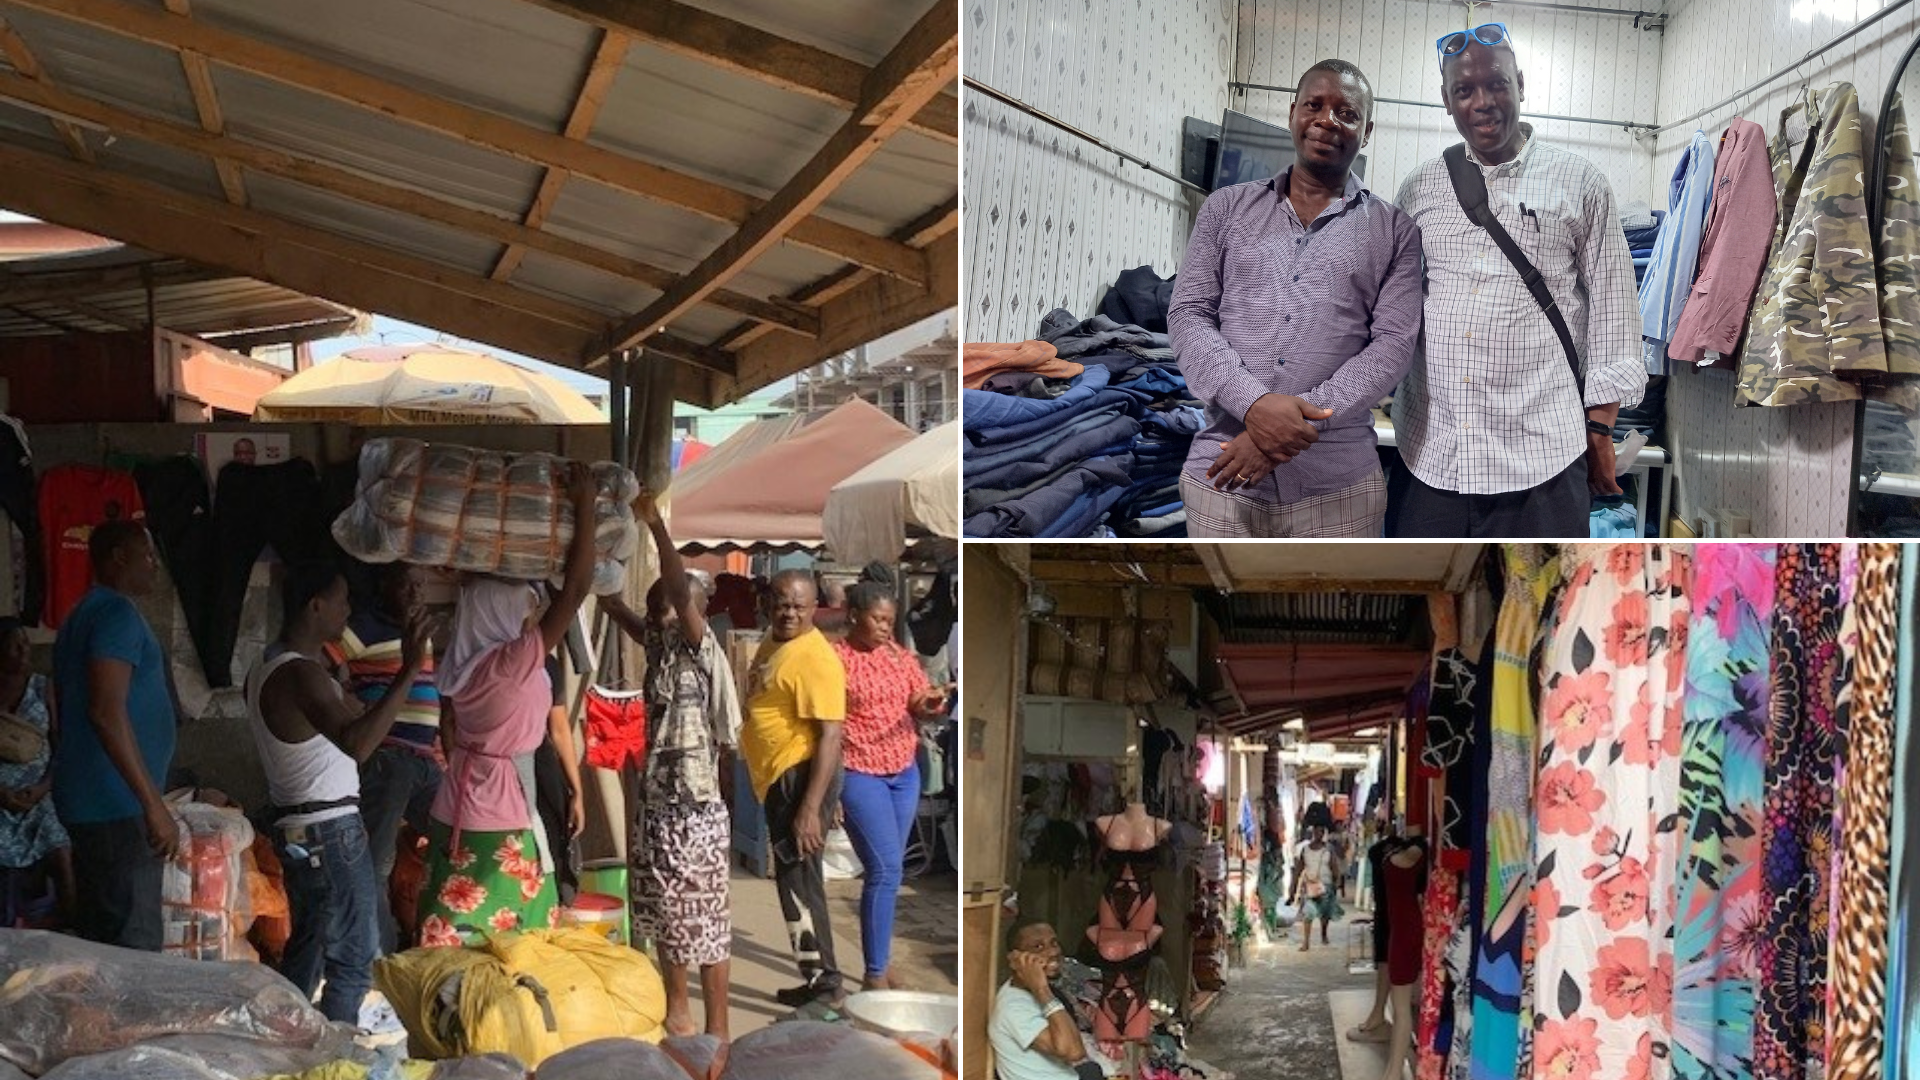 Three photos in a grid pattern. Two show busy used clothing markets in Ghana and the other shows Baniyelme Zoogah posing for a photo with a ma